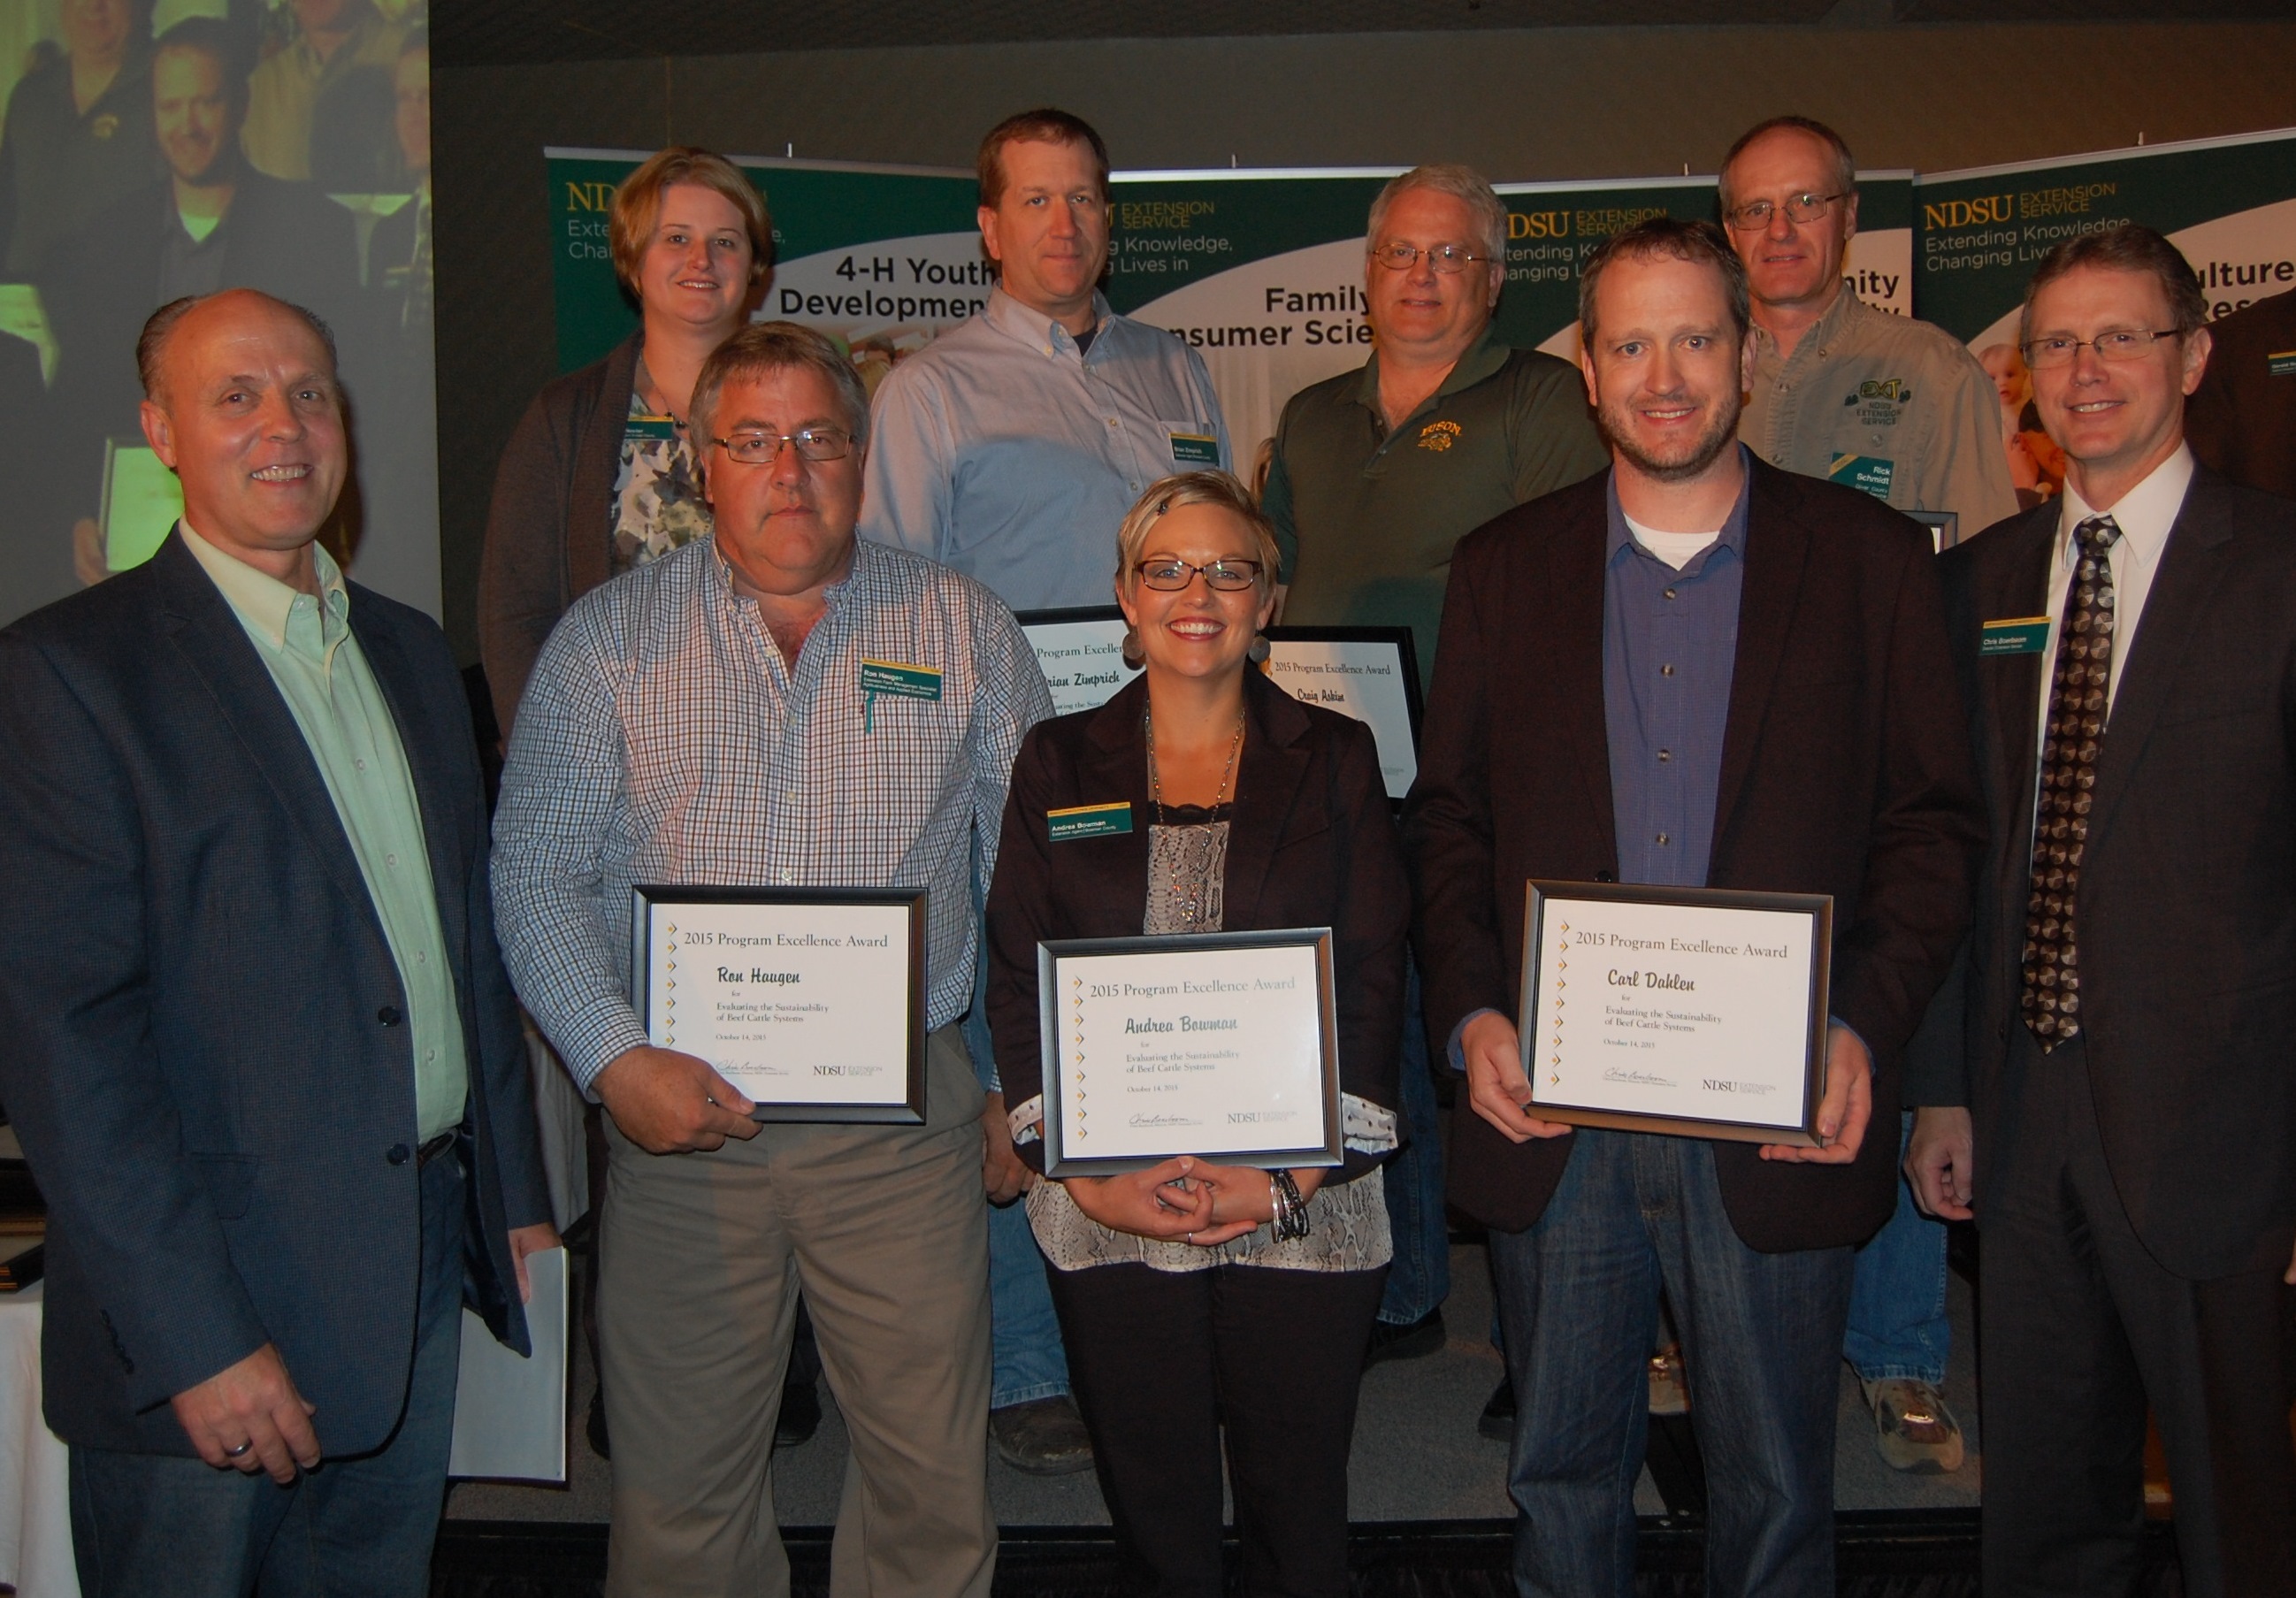 Patrick Sitter, general manager of Farm and Ranch Guide, and Chris Boerboom, NDSU Extension director, present a Program Excellence Award to this team for developing a program to evaluate the sustainability of beef cattle breeding systems. Pictured are (front row, left to right) Sitter; Ron Haugen, Extension farm management specialist; Andrea Bowman, Extension agent, agriculture and natural resources, Bowman County; Carl Dahlen, Extension beef cattle specialist; Boerboom; (back row, left to right) Penny Nester, Extension agent, agriculture and natural resources, Kidder County; Brian Zimprich, Extension agent, agriculture and natural resources, Ransom County; Craig Askim, Extension agent, agriculture and natural resources, Mercer County; Rick Schmidt, Extension agent, agriculture and natural resources, Oliver County (NDSU photo)